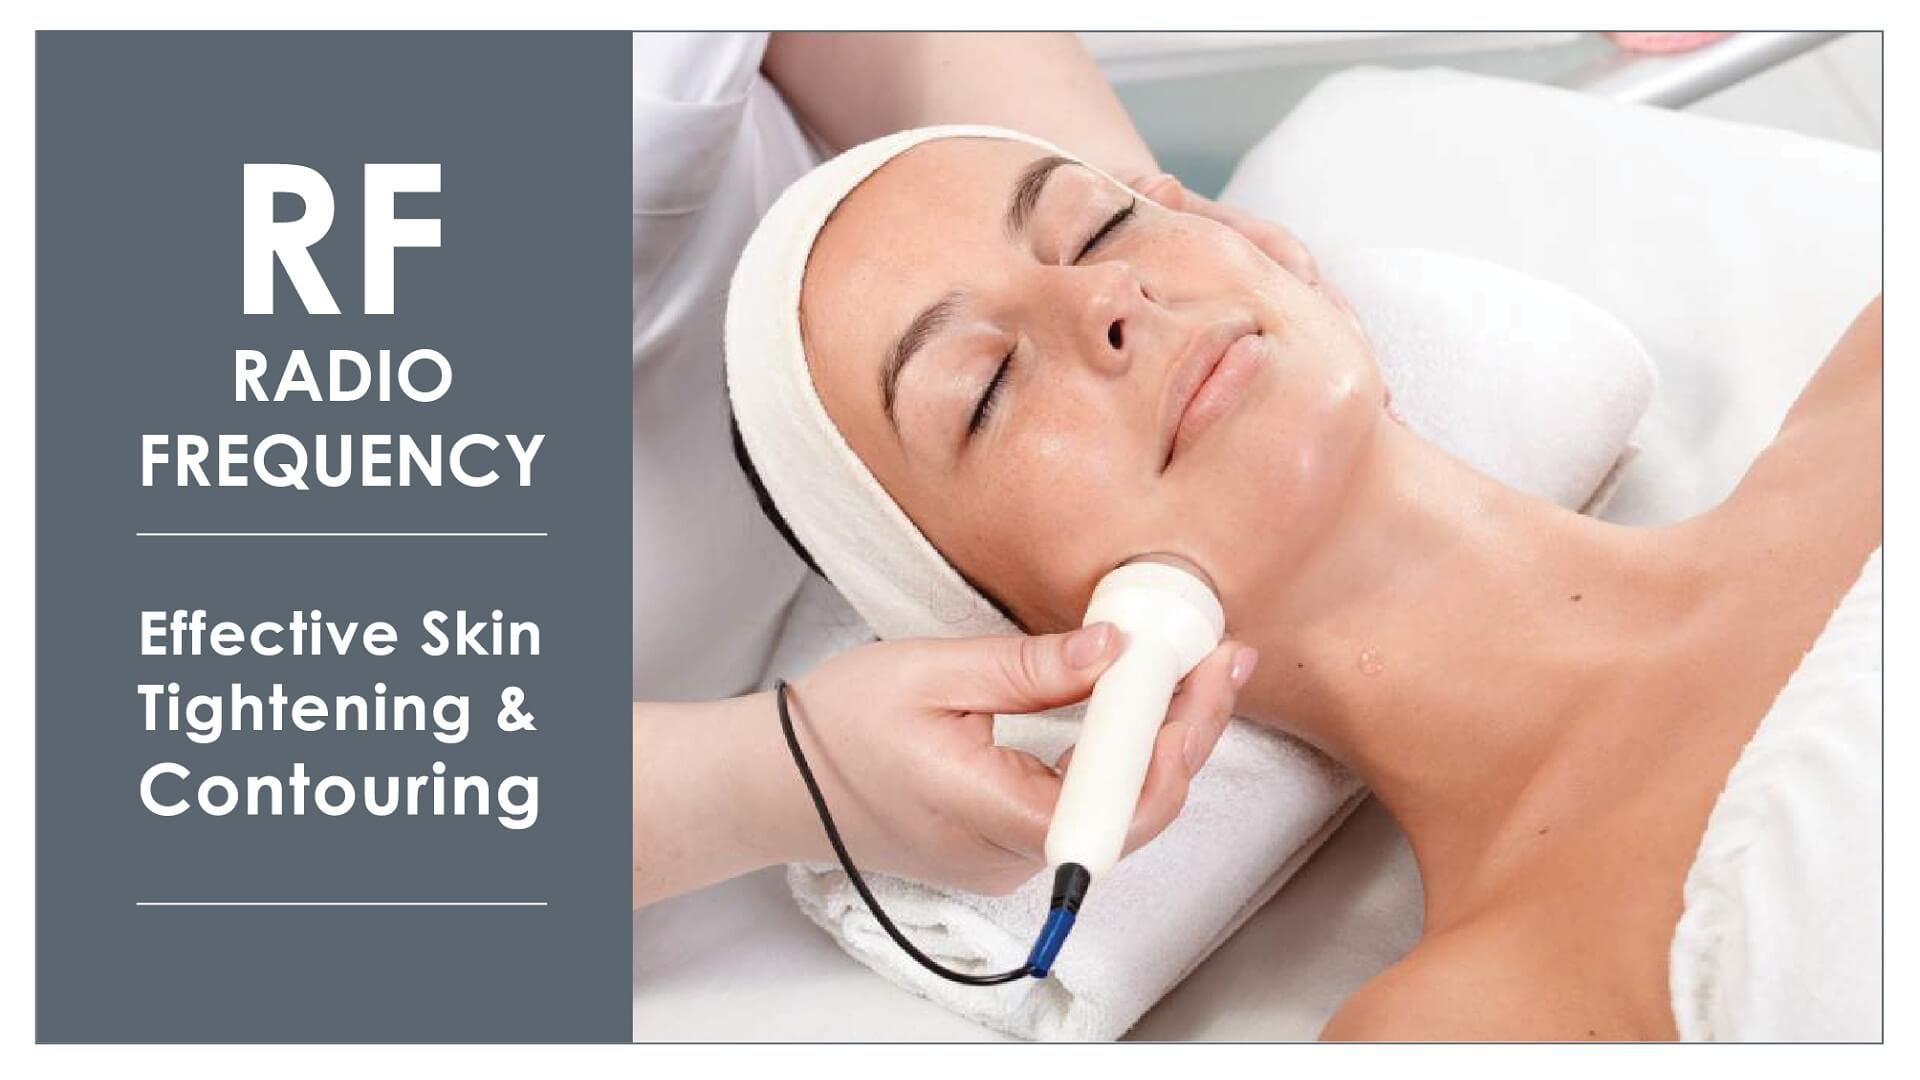 Body Sculpting with Radio Frequency Devices - Explore The Differences from  Skin to Fat